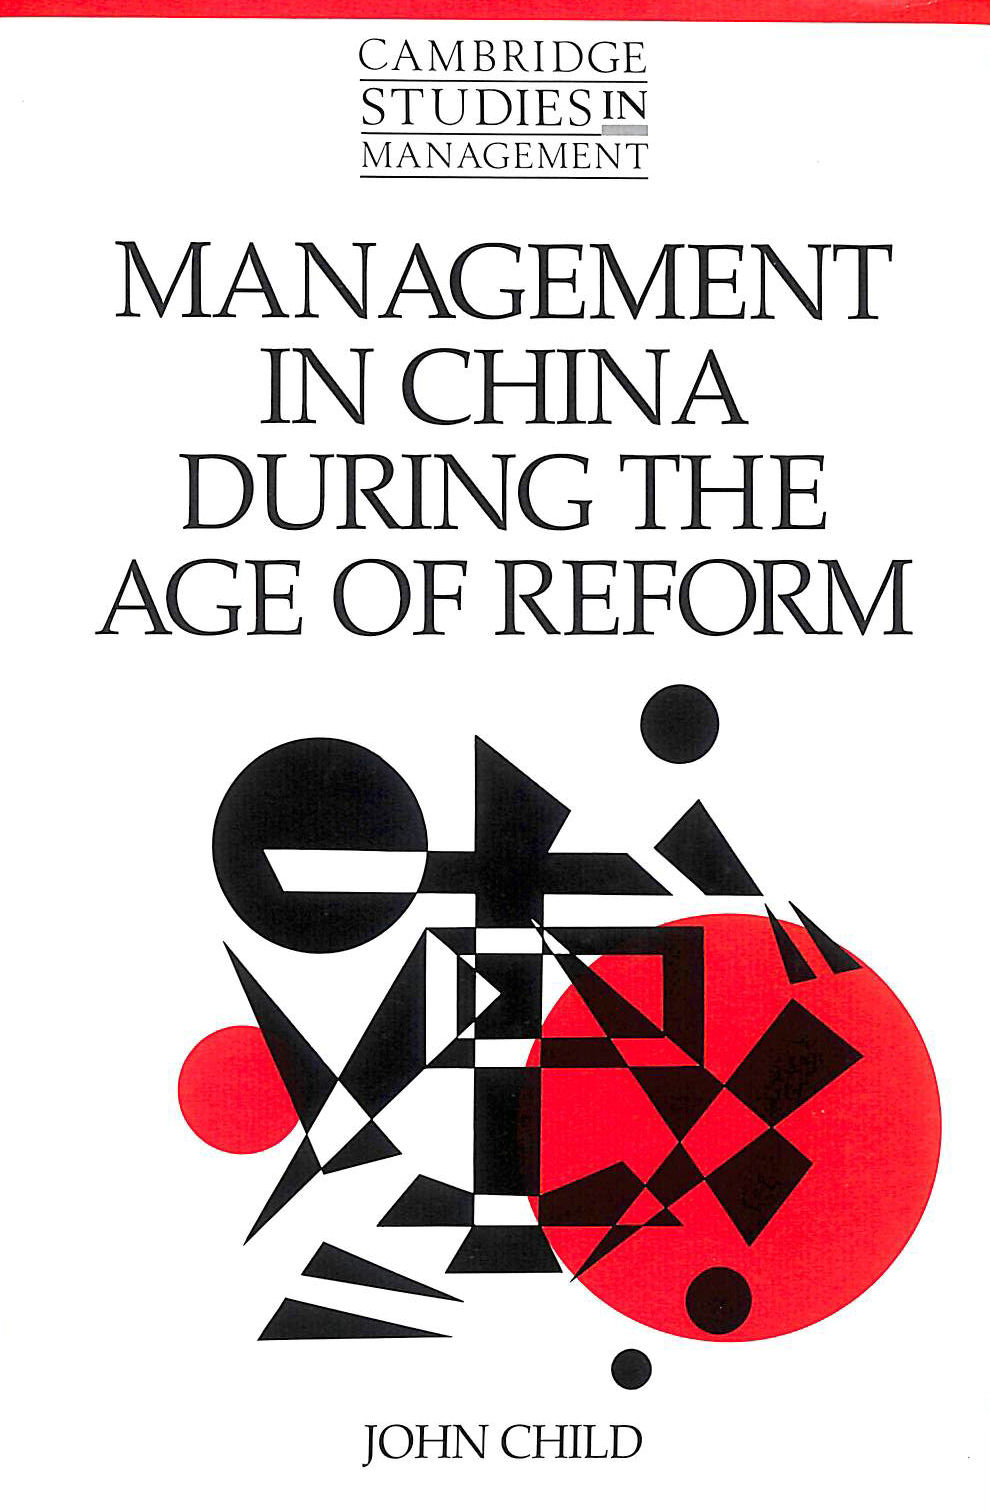 CHILD, JOHN - Management in China During the Age of Reform: 23 (Cambridge Studies in Management, Series Number 23)